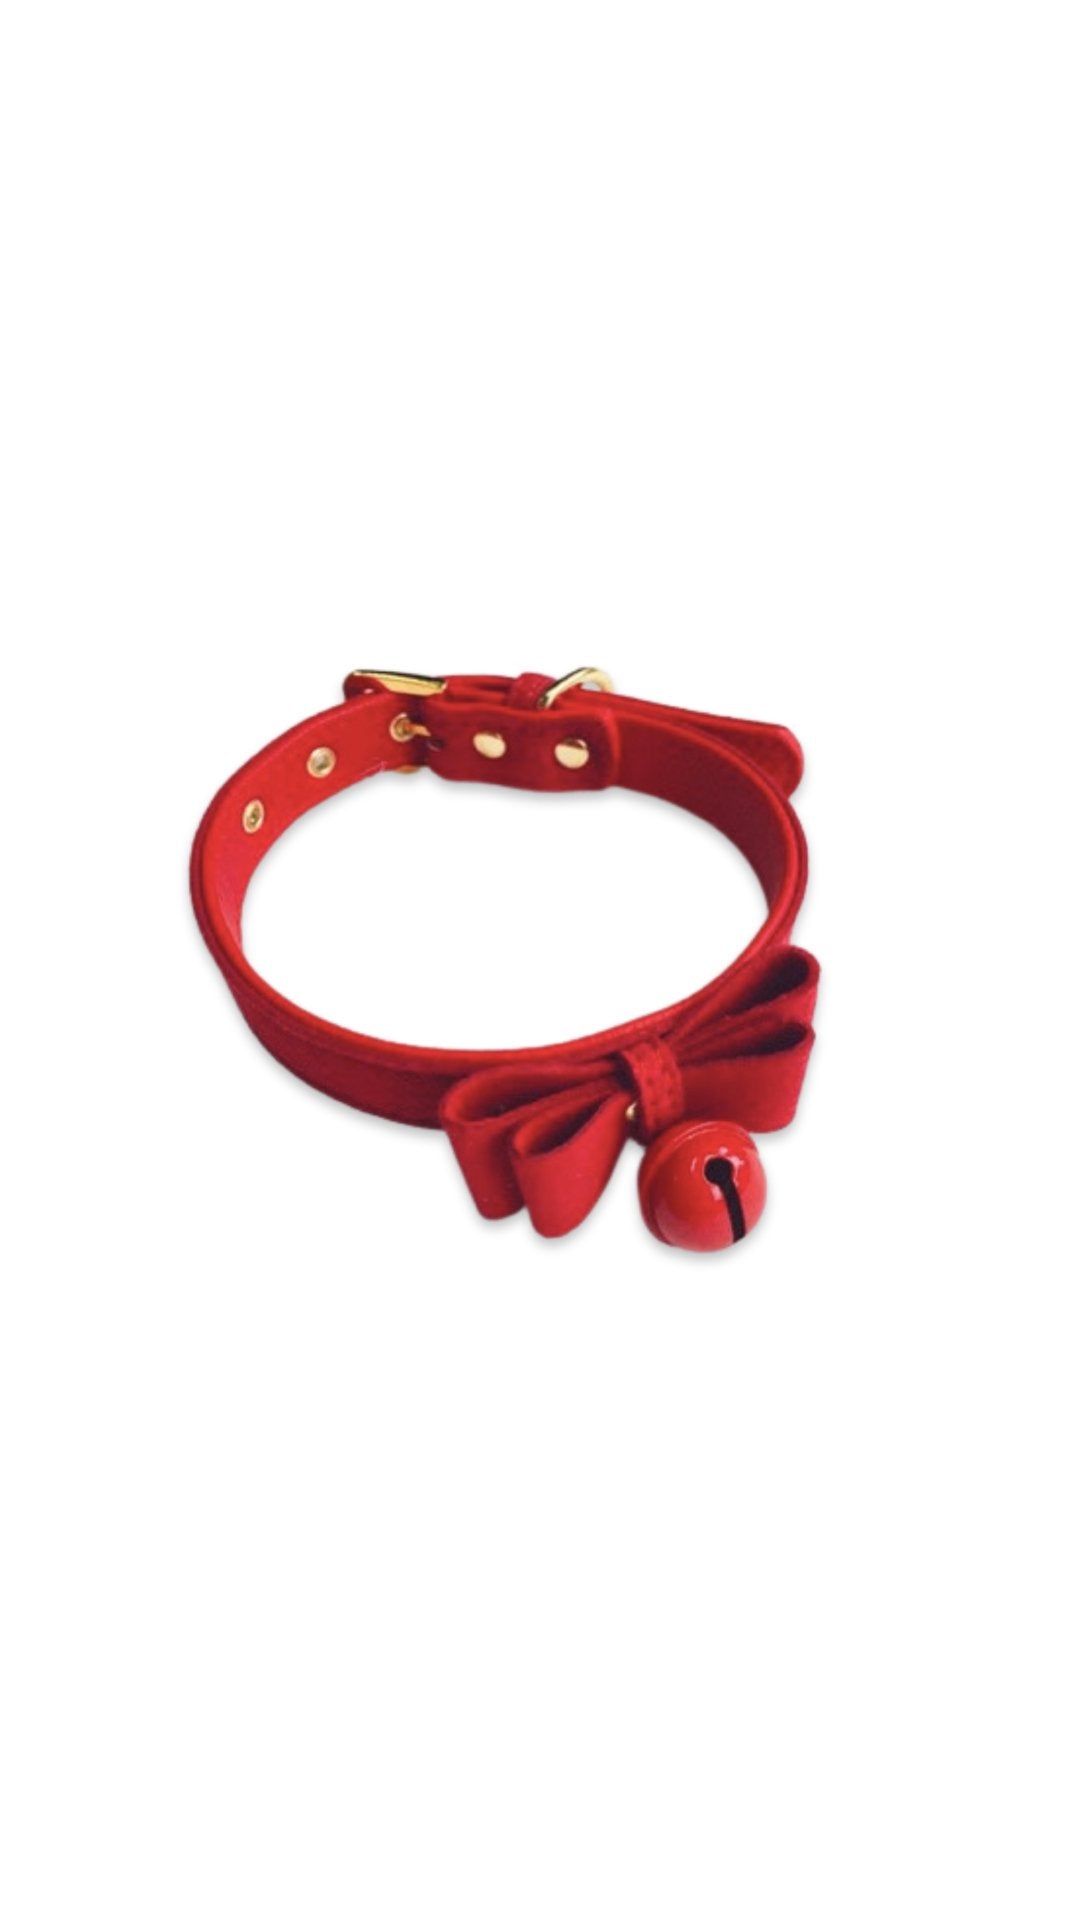 Choker Bow and Bell - Red - Model Express VancouverAccessories